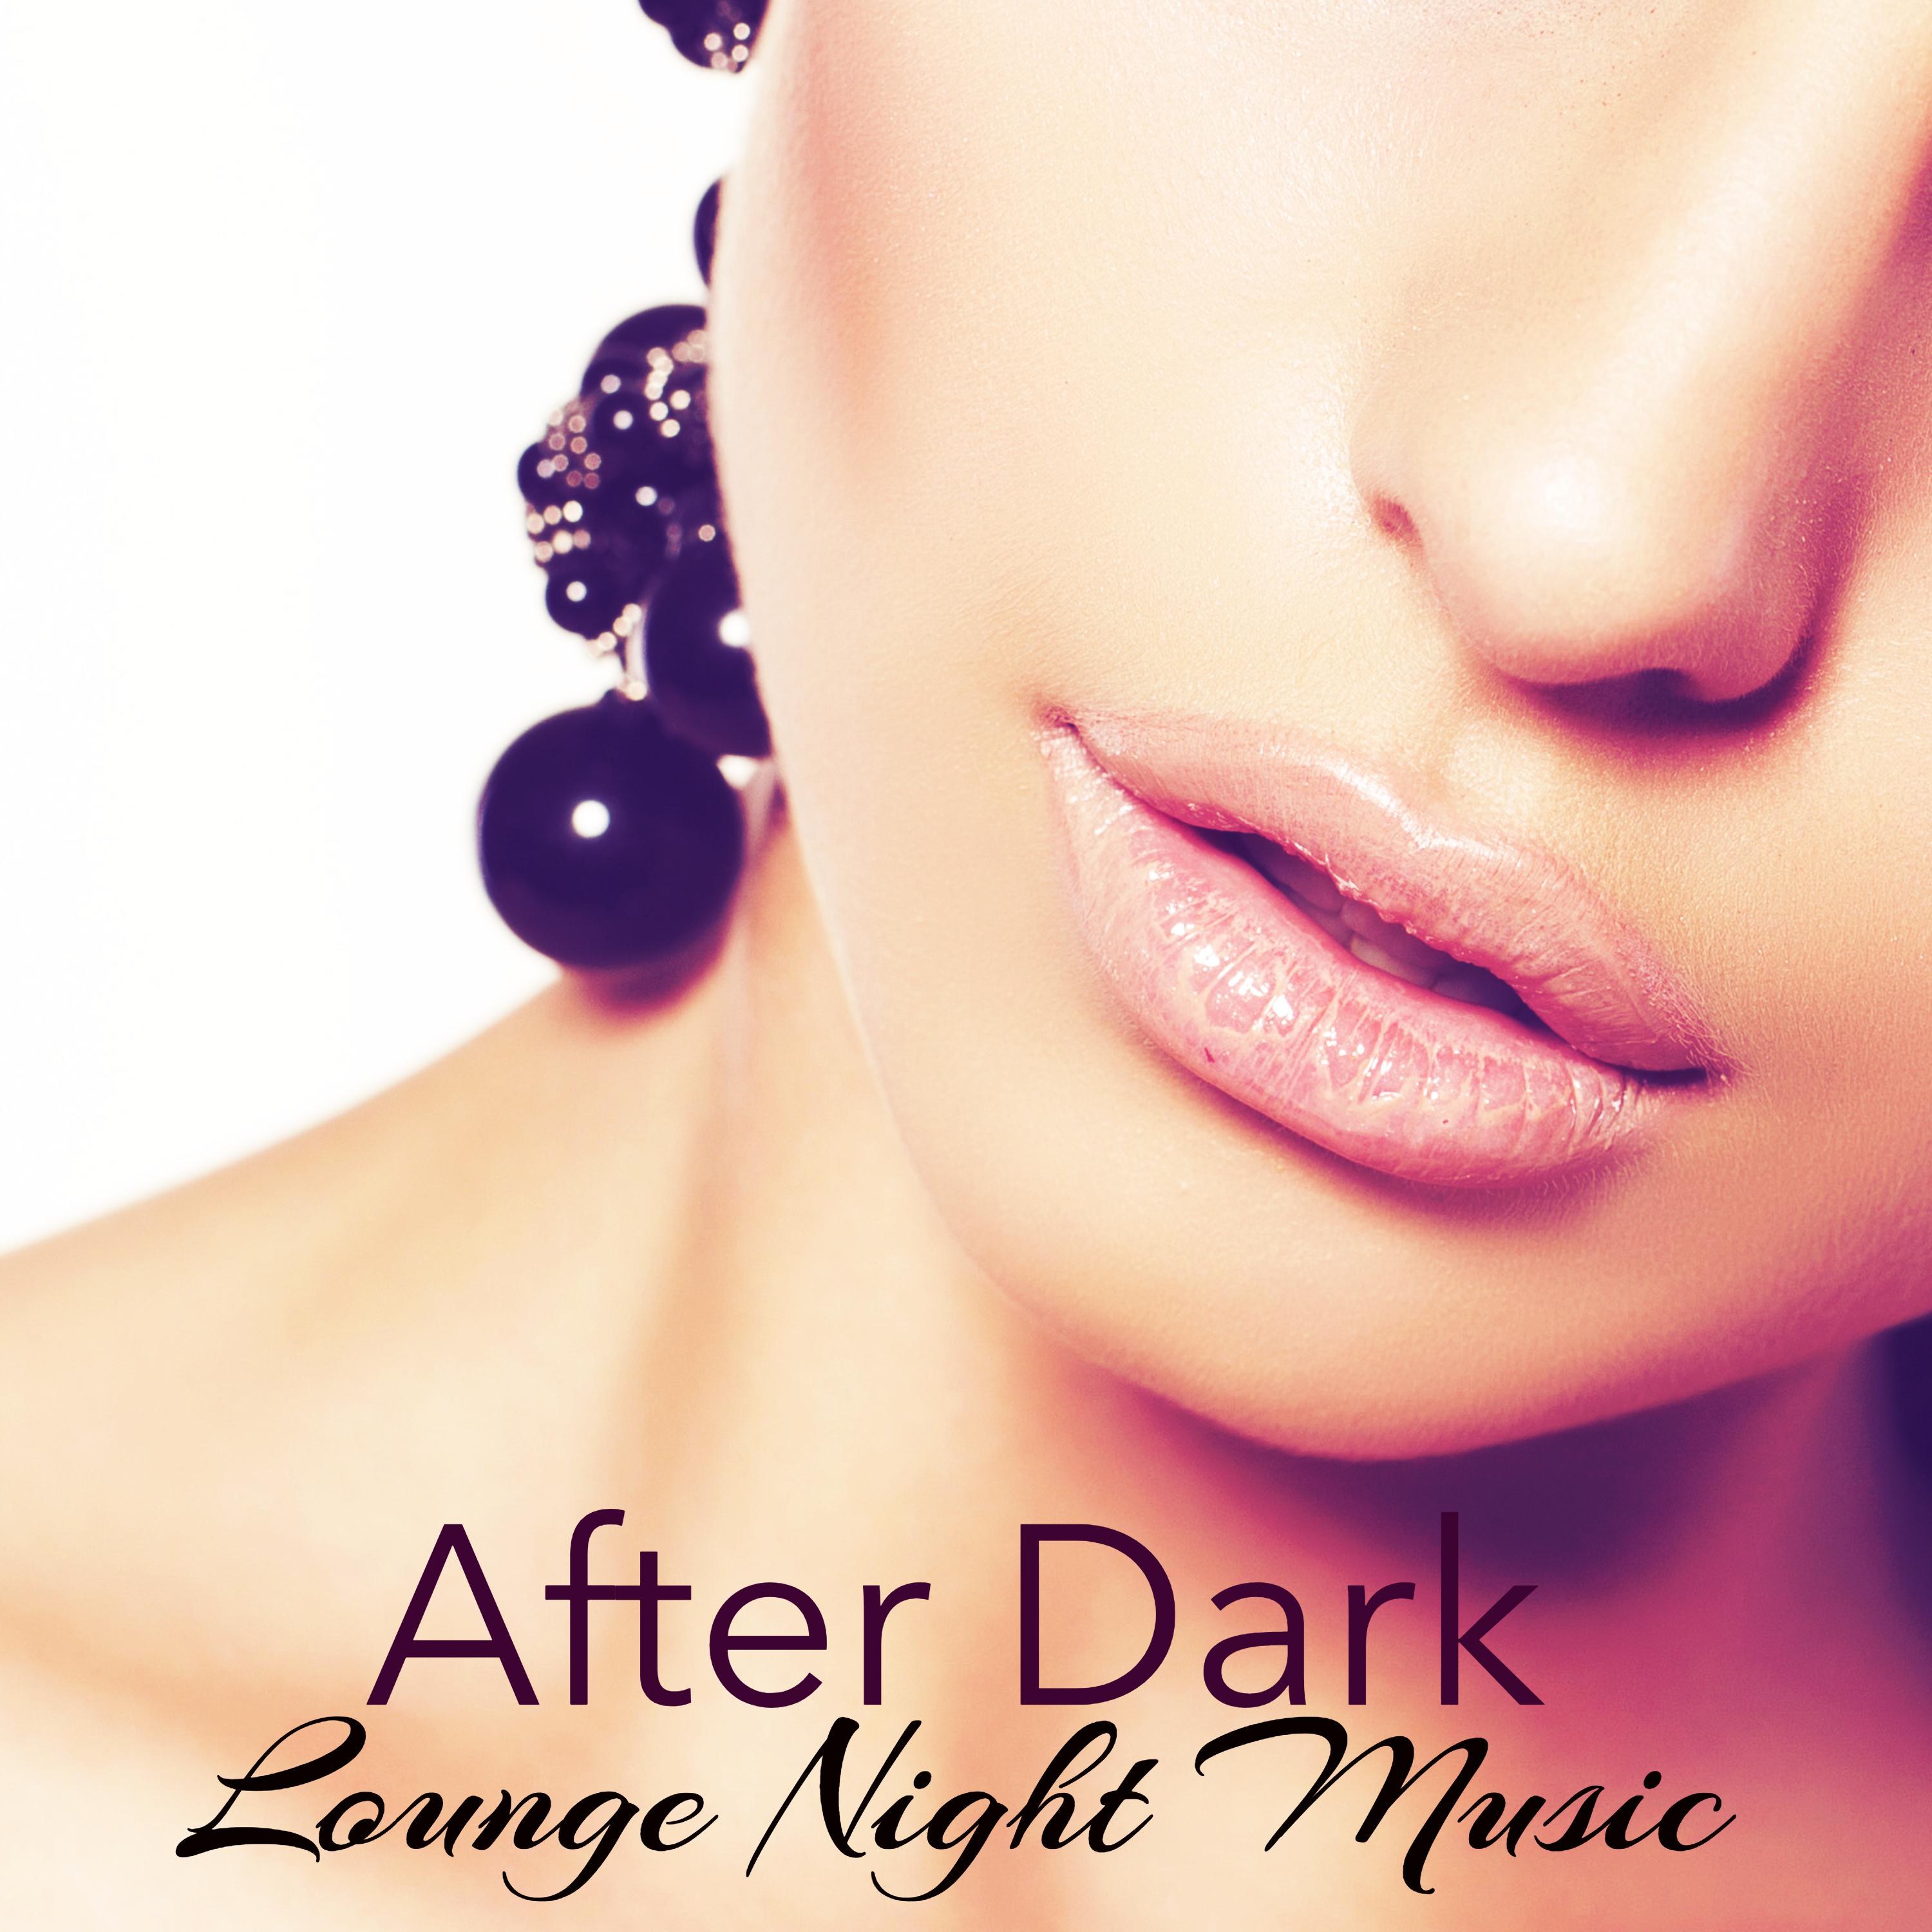 After Dark Lounge Night Music – Summer Nights Erotic Chill Out Collection Compiled by Delmar Verano Dj